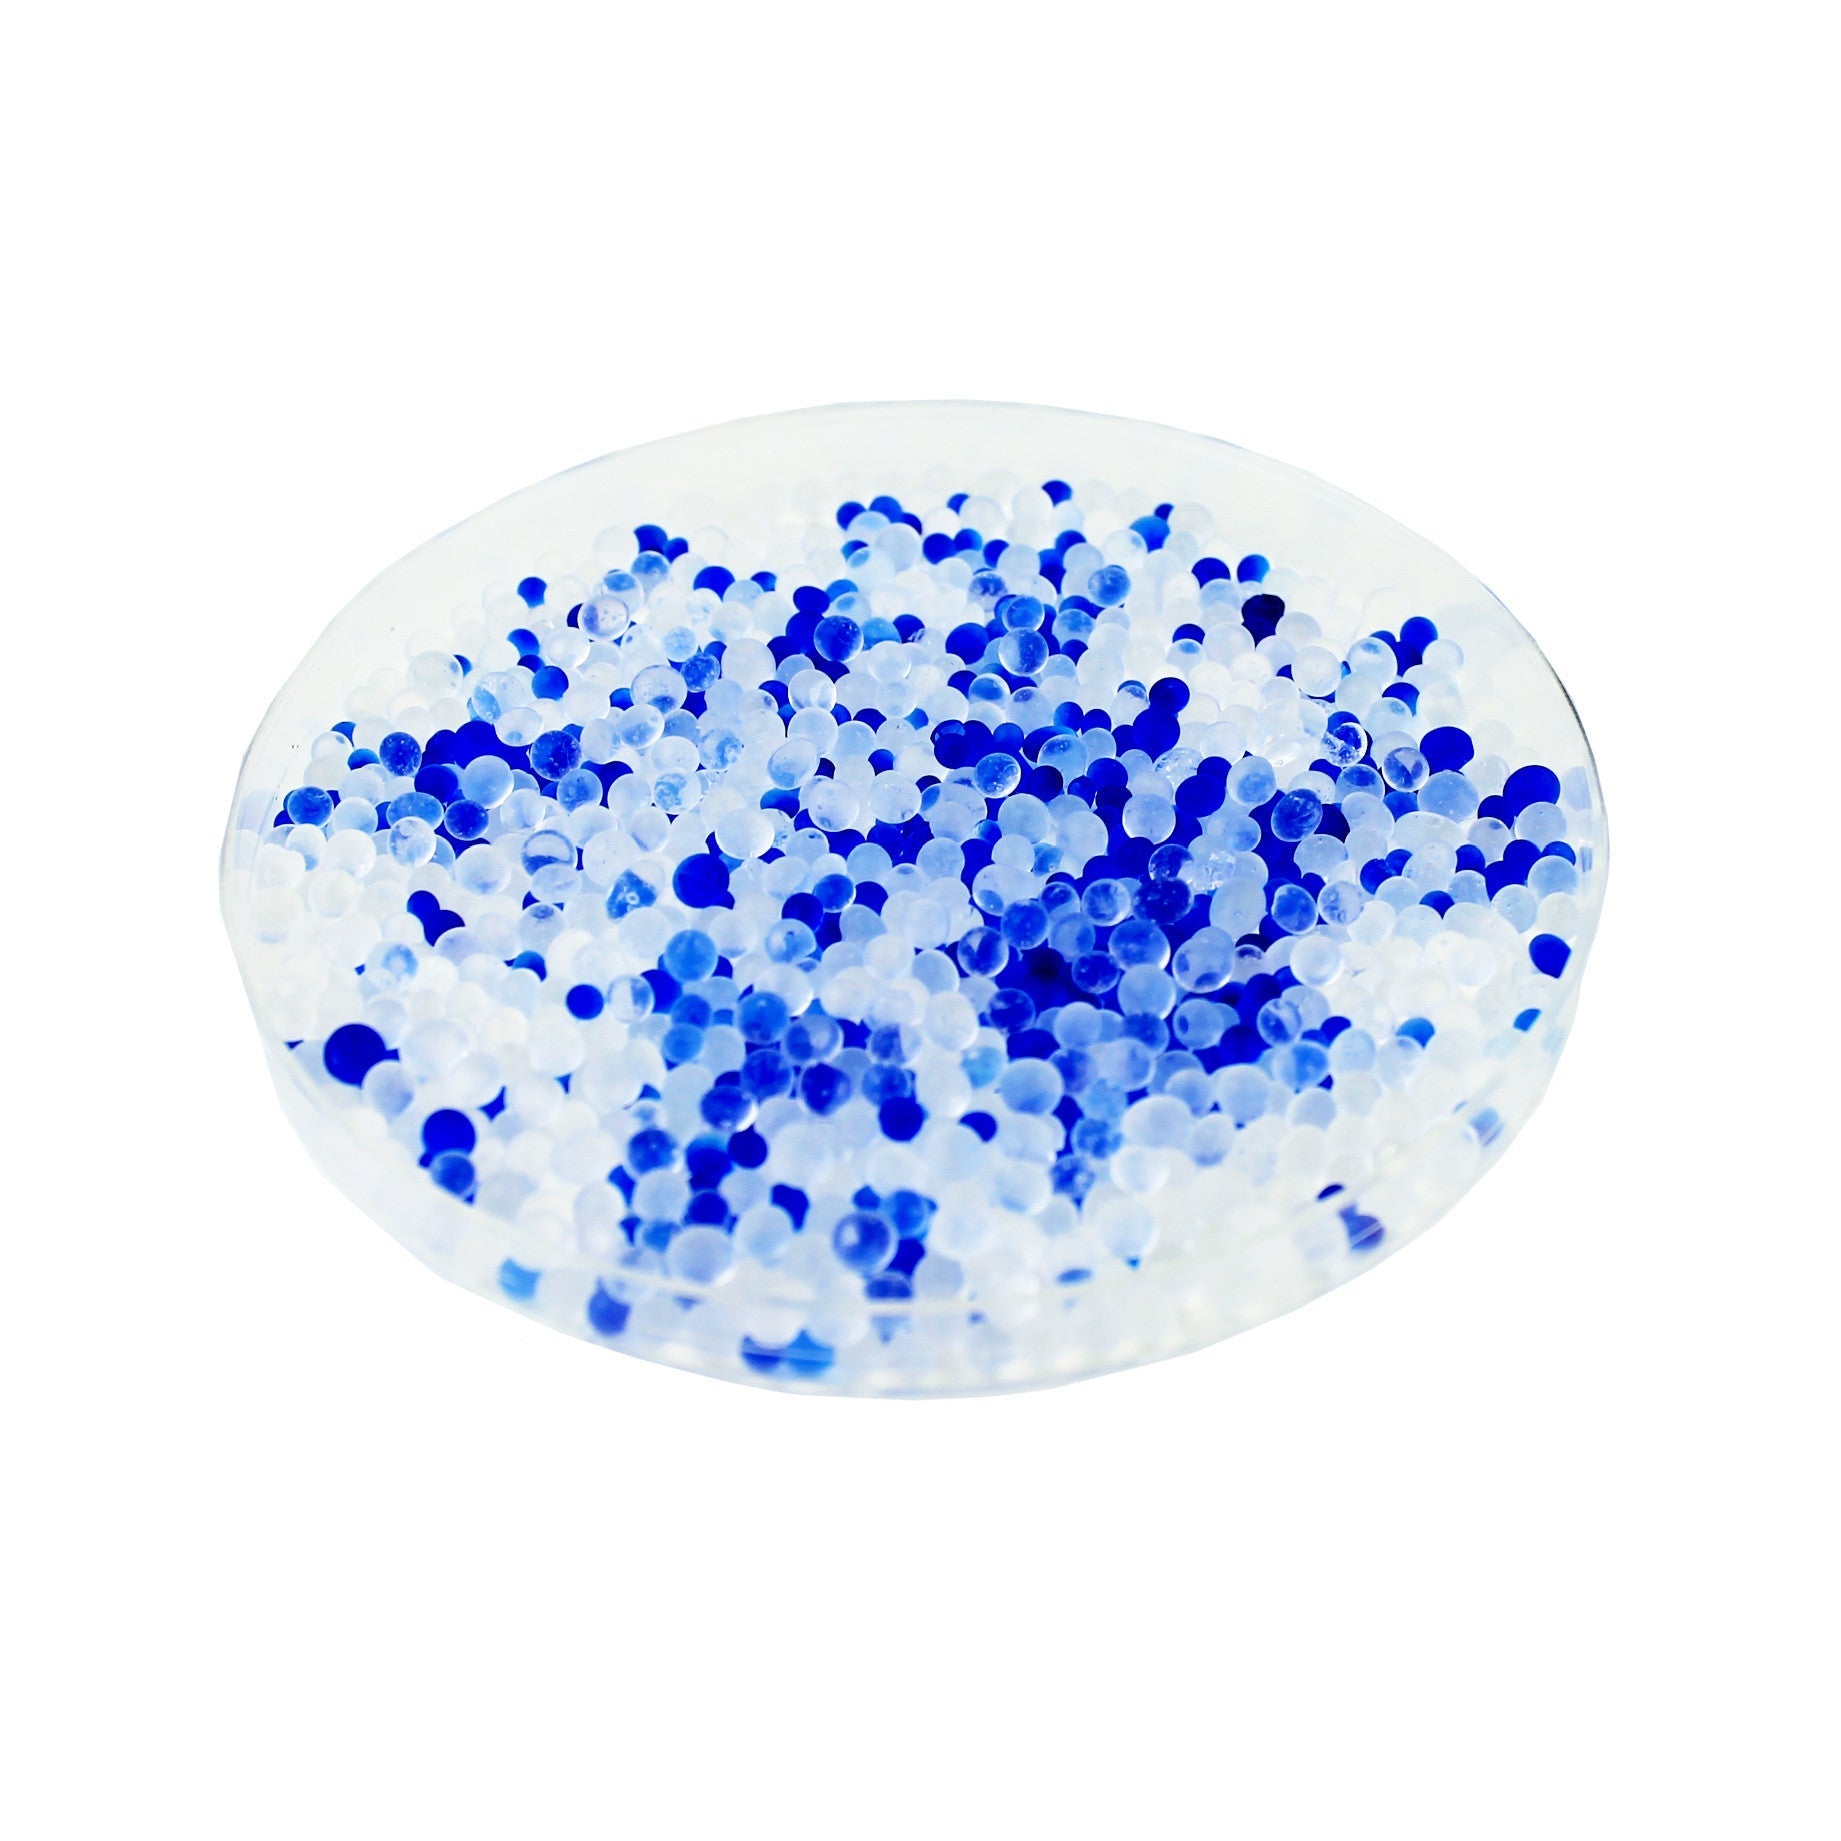 4 Gallon (28-30 LBS) "Dry & Dry" High Quality White & Blue Mixed Silica Gel Desiccant Beads - Rechargeable Beads